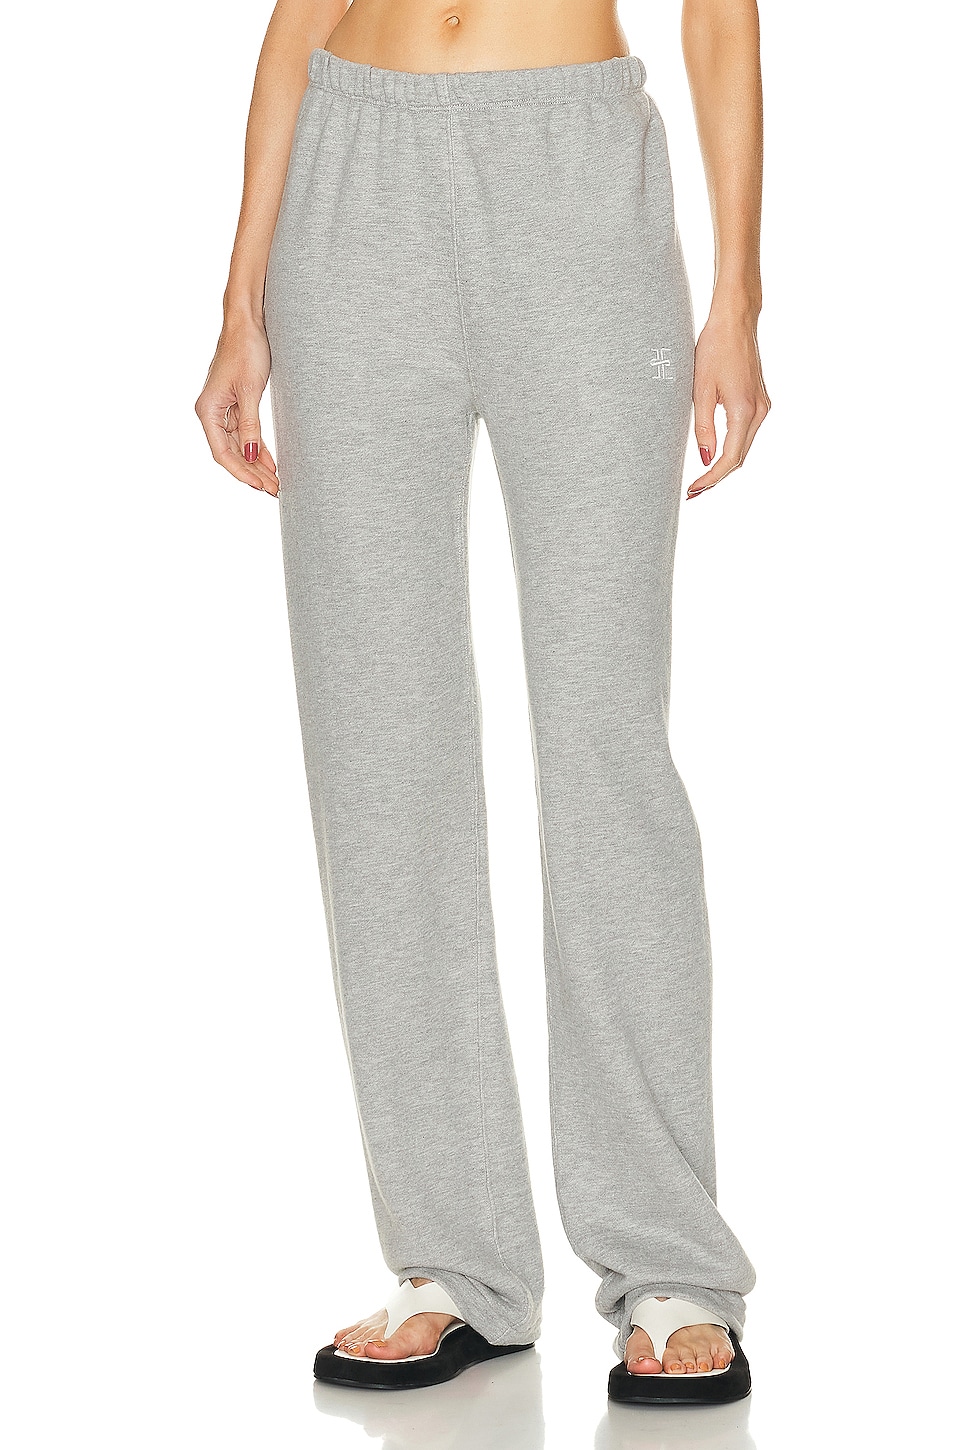 Image 1 of Eterne Straight Leg Sweatpant in Heather Grey